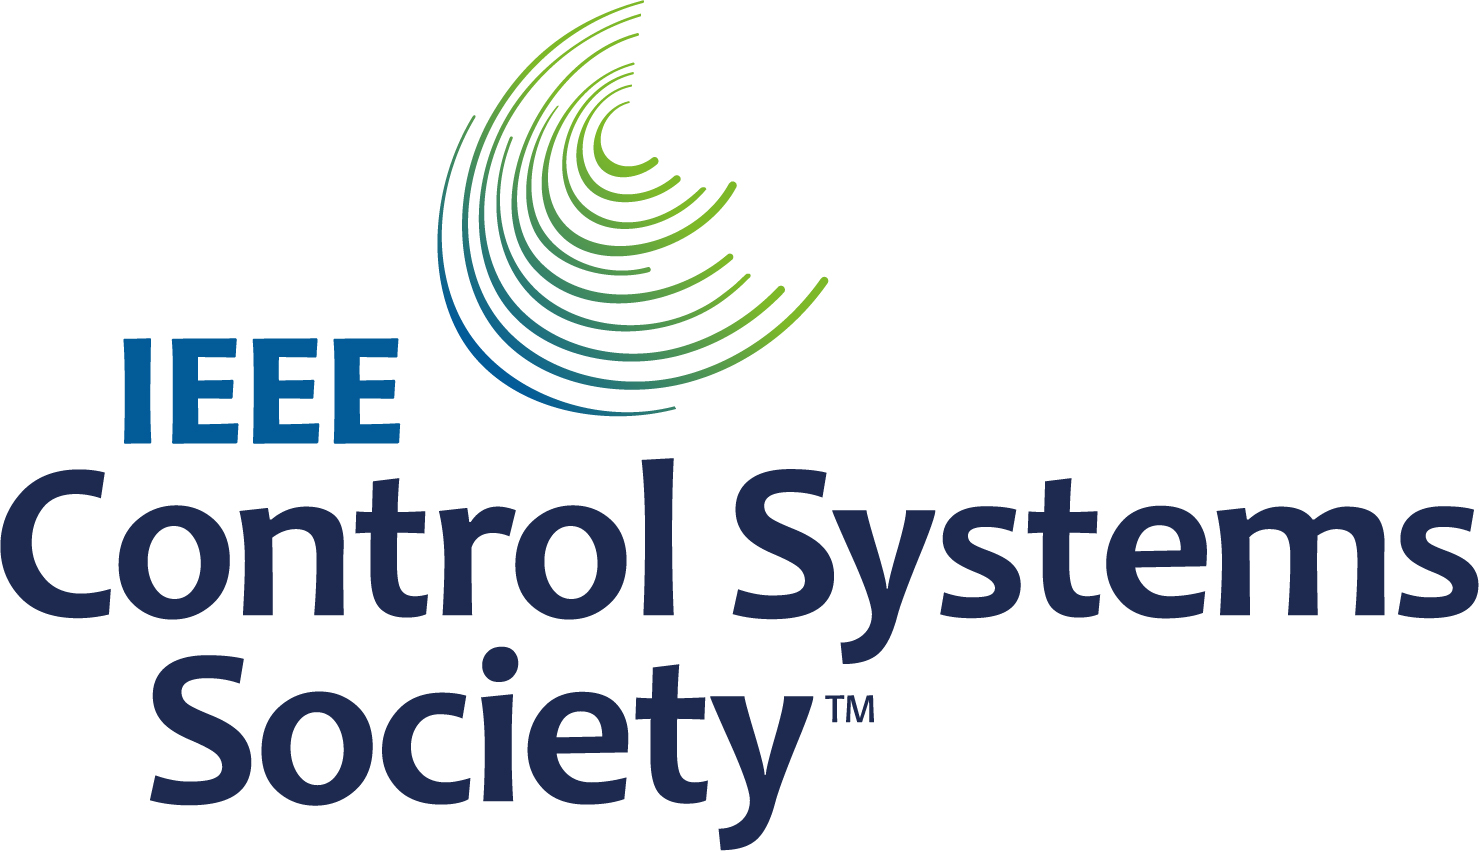 Control Systems Society